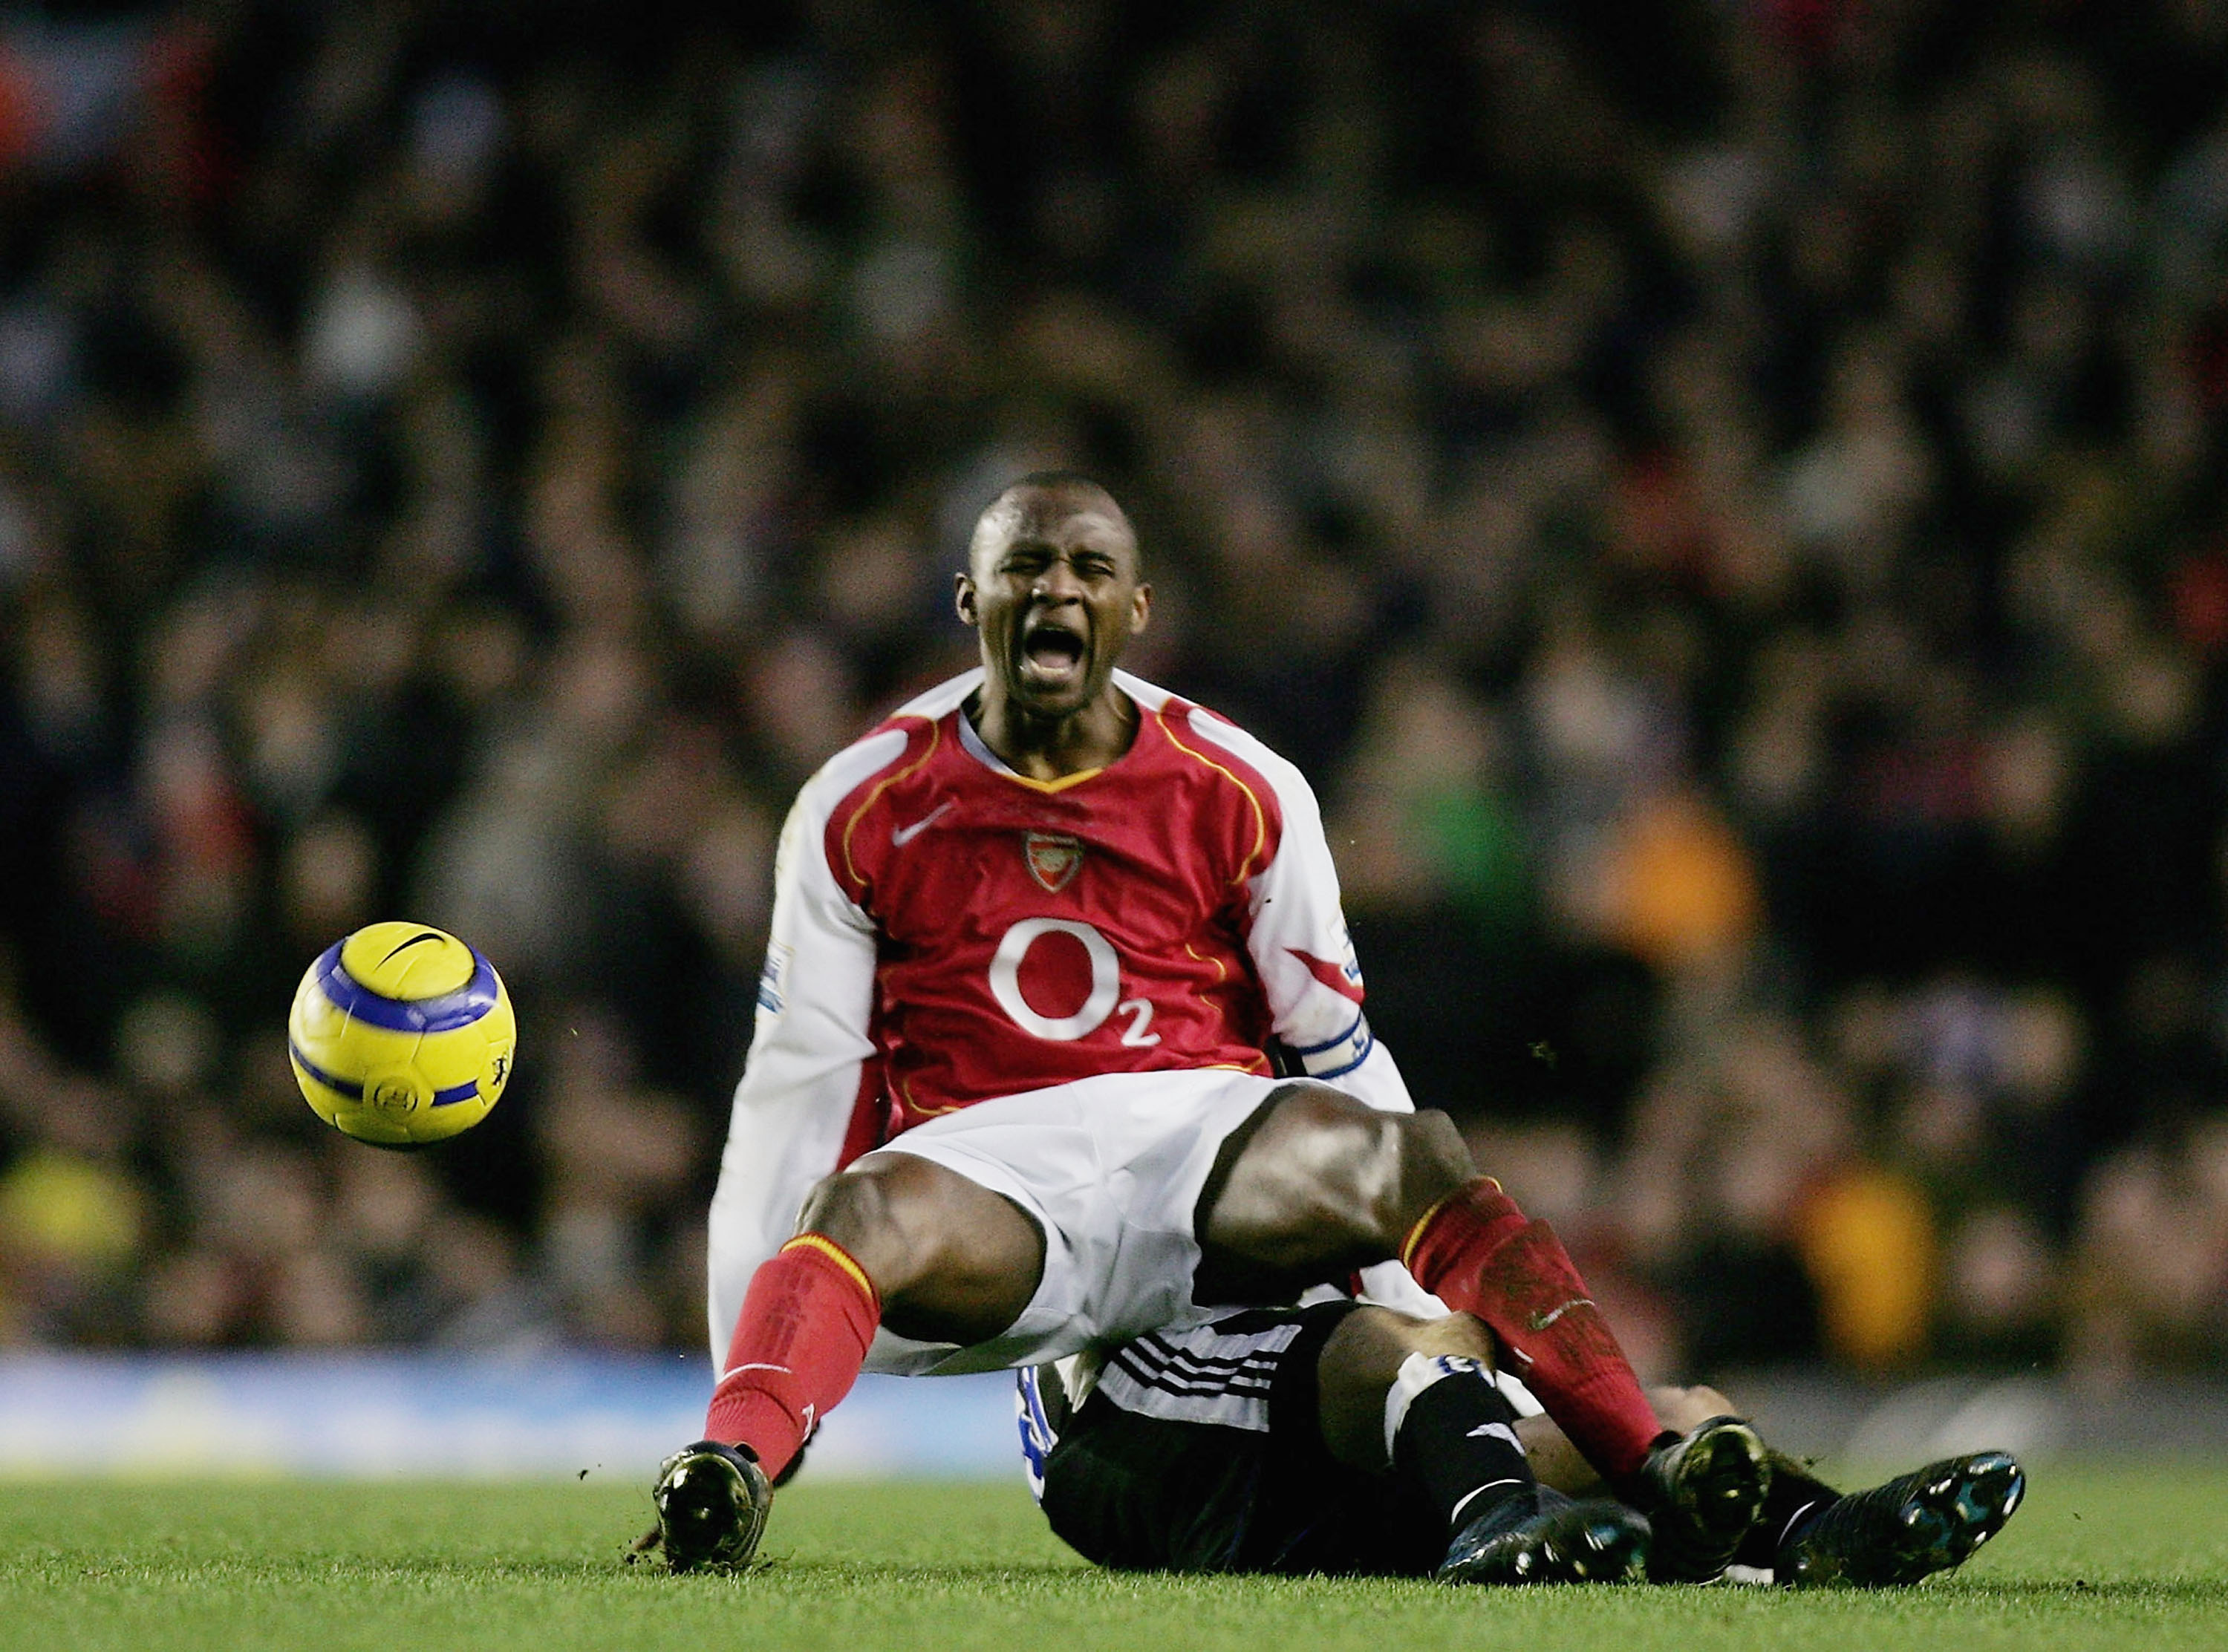 LONDON - JANUARY 23: Patrick Vieira of Arsenal is tackled and fouled by Lee Bowyer of Newcastle, during the Barclays Premiership match between Arsenal and Newcastle United at Highbury on January 23, 2005 in London, England.  (Photo by Ben Radford/Getty Im